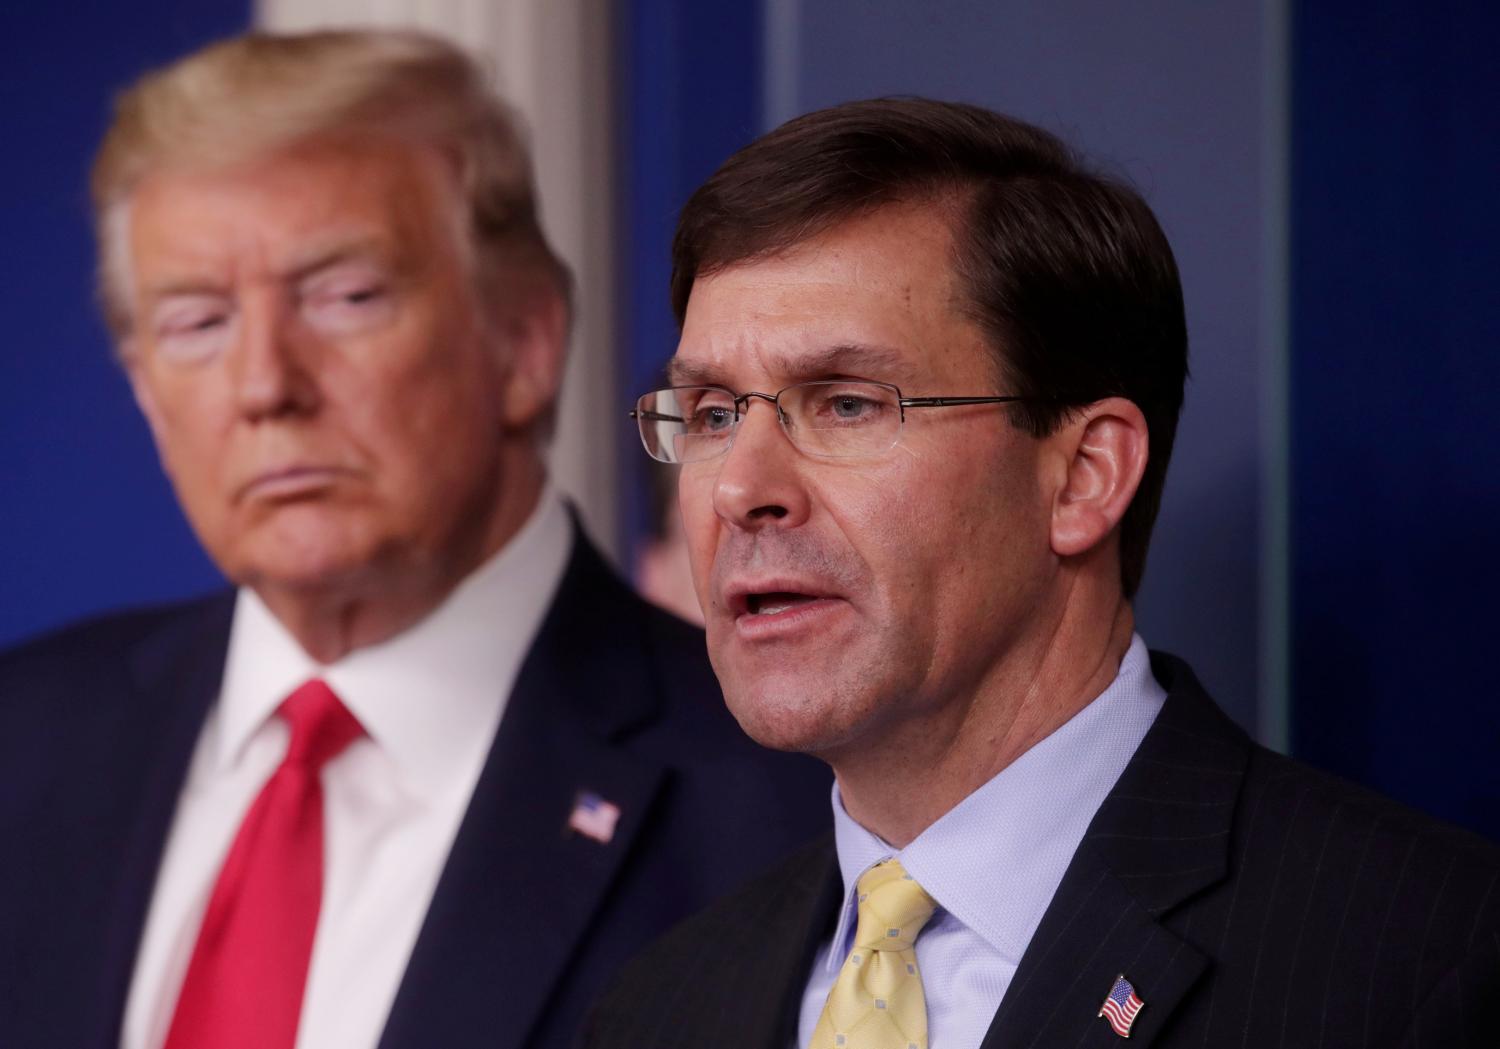 FILE PHOTO: U.S. President Donald Trump listens to Secretary of Defense Mark Esper address the daily White House coronavirus response briefing with members of the administration's coronavirus task force at the White House in Washington, U.S., March 18, 2020. REUTERS/Jonathan Ernst - RC2GMF9QPP29/File Photo